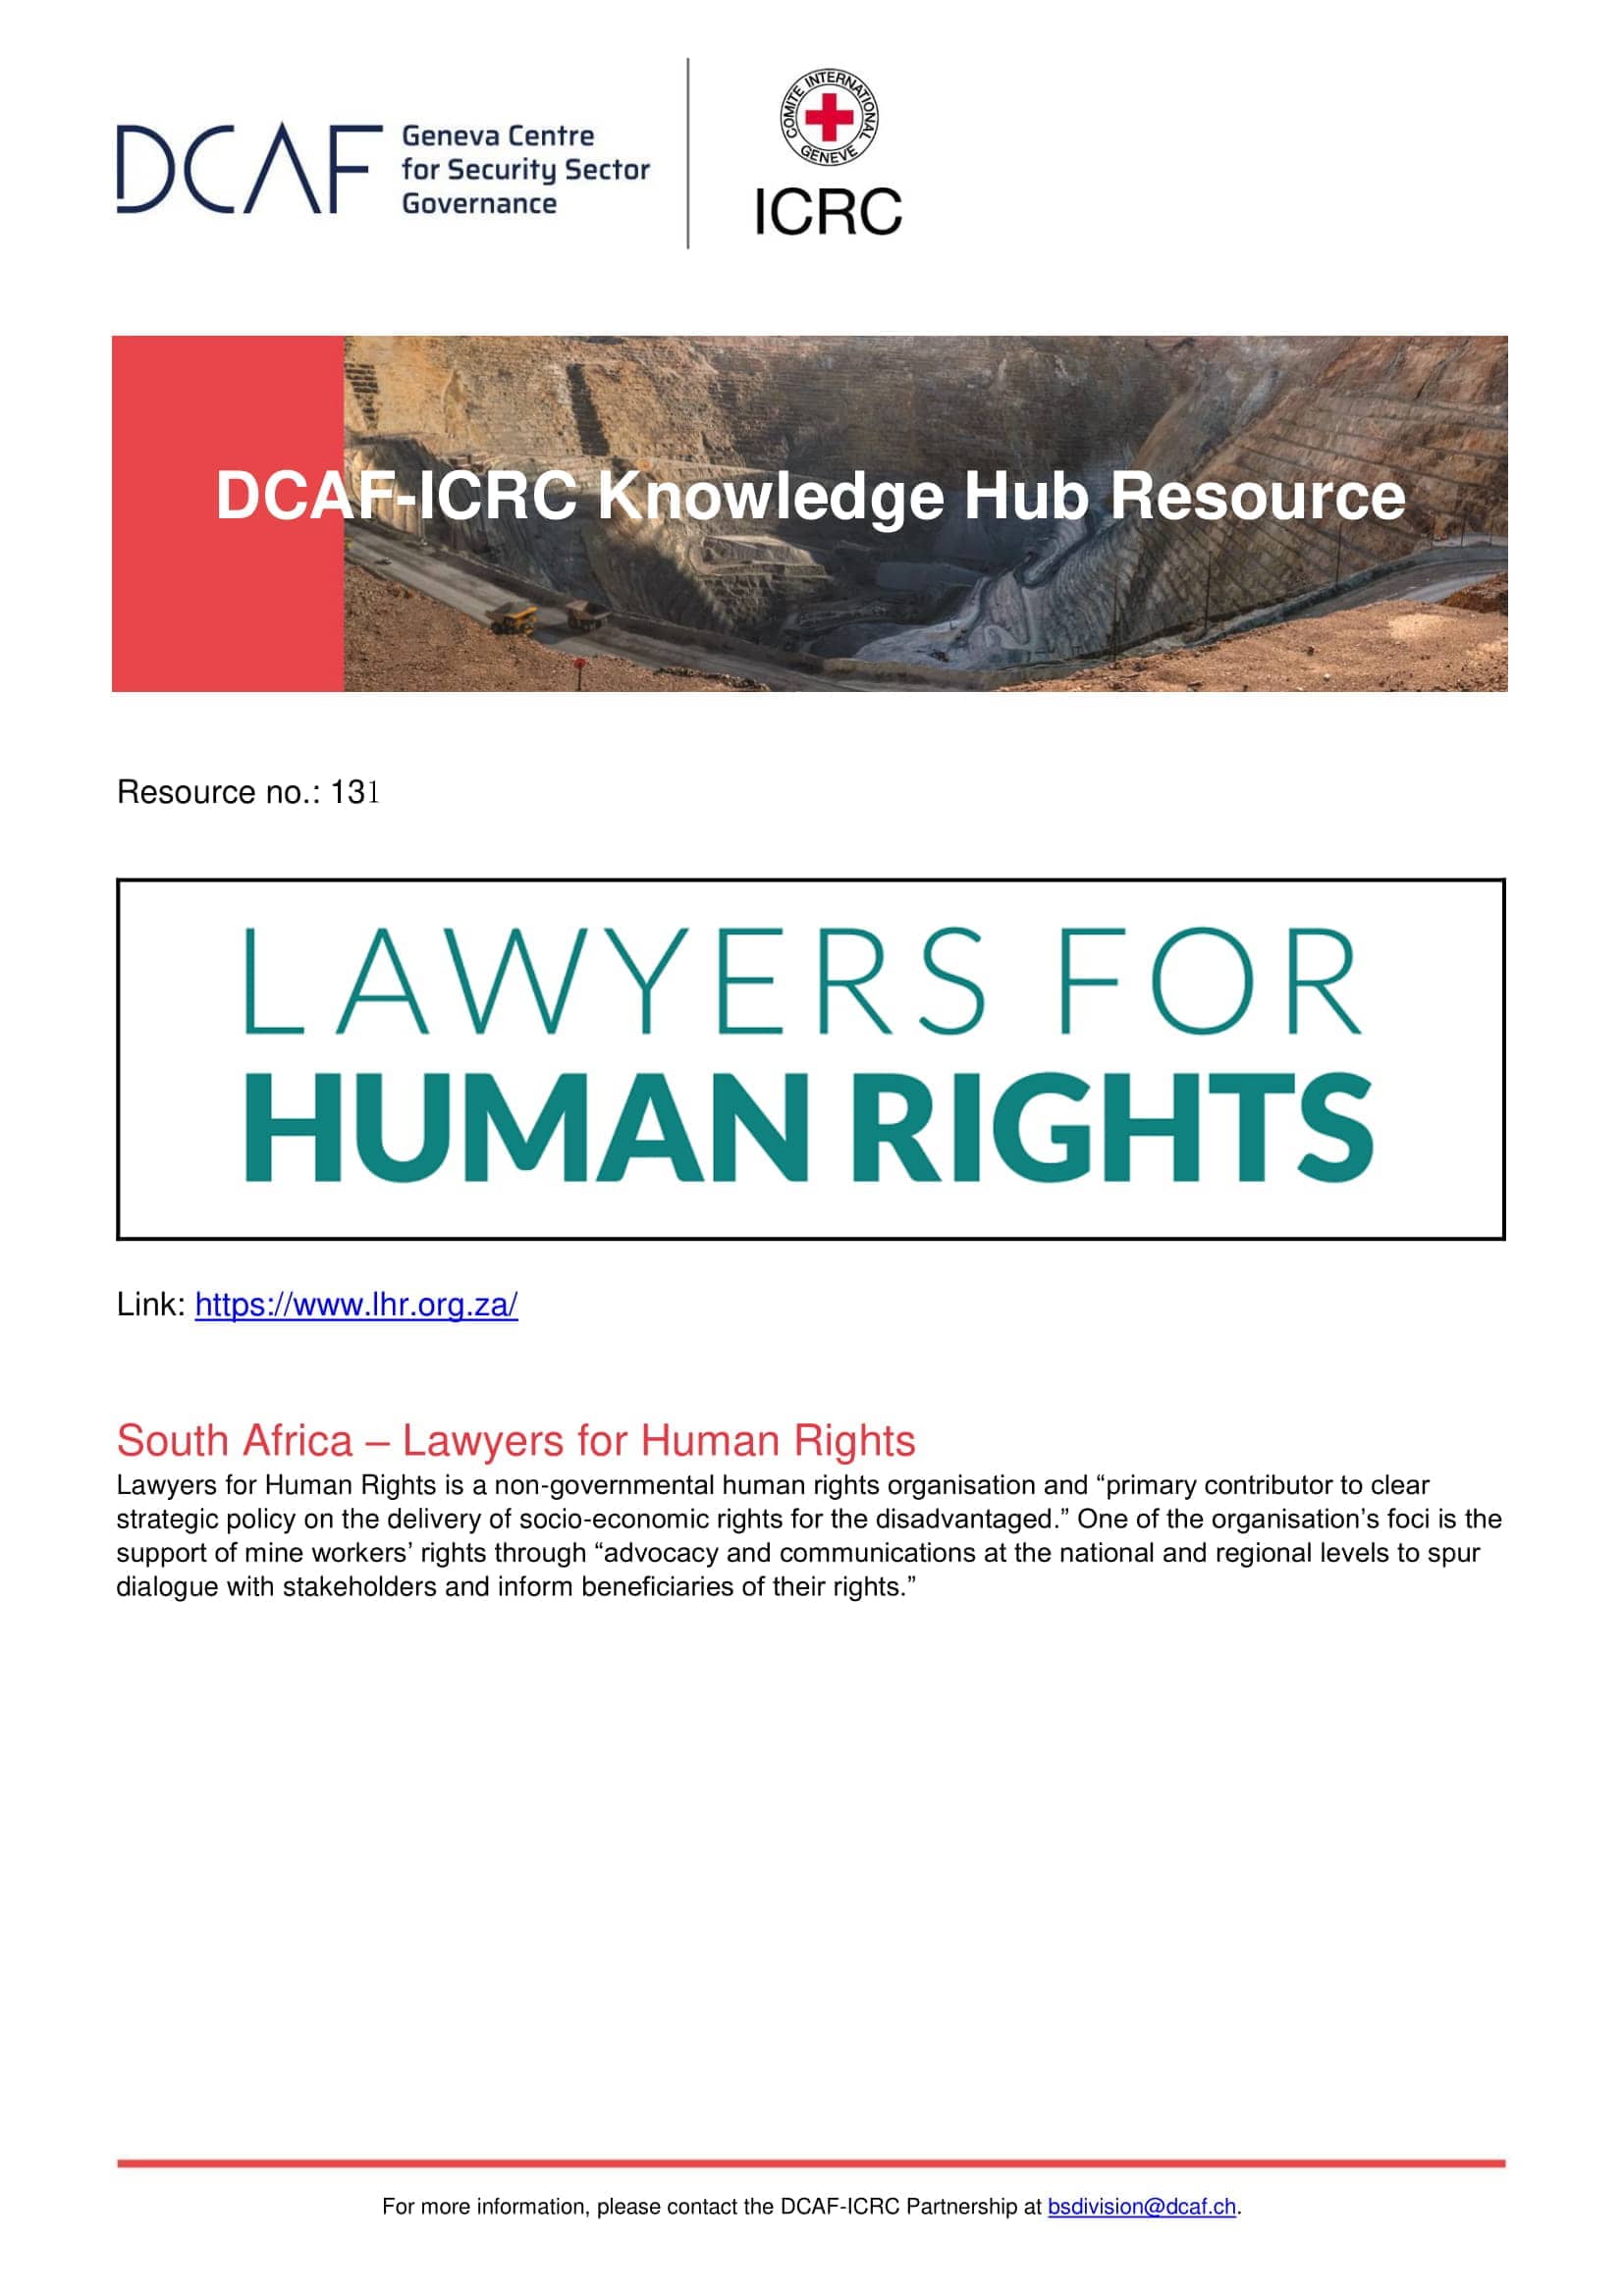 South Africa – Lawyers for Human Rights